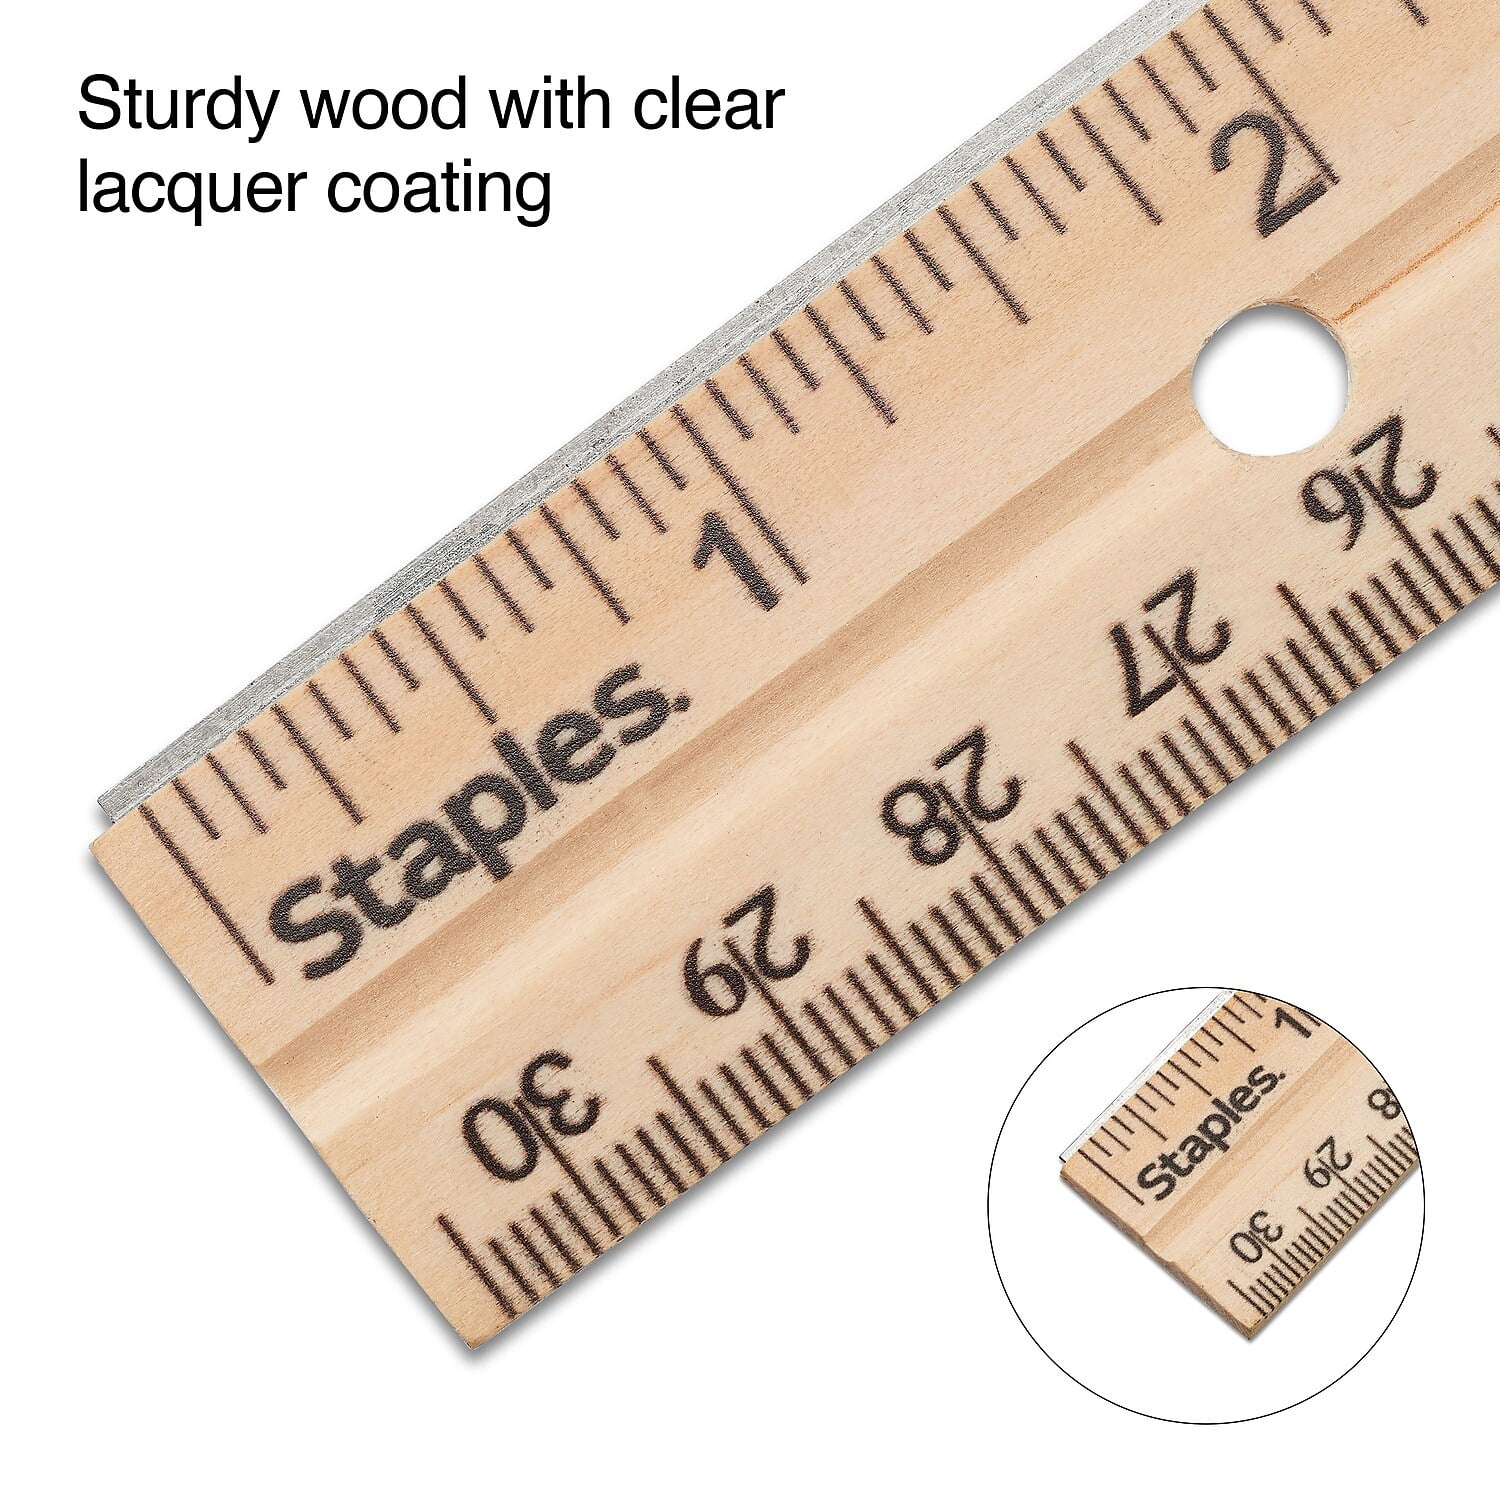 Staples 12 Wooden Standard Imperial Scale Ruler, Wooden (51881-CC